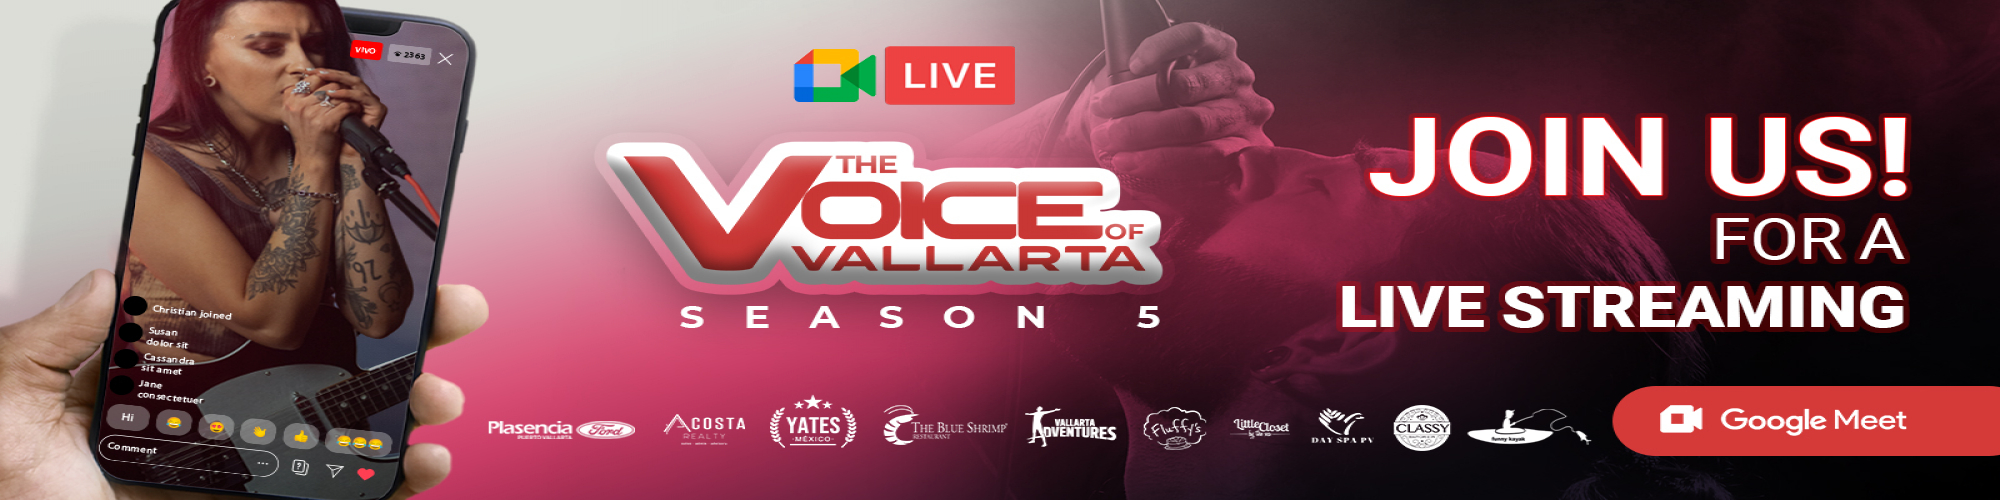 Live Streaming: The Voice of Vallarta 5 